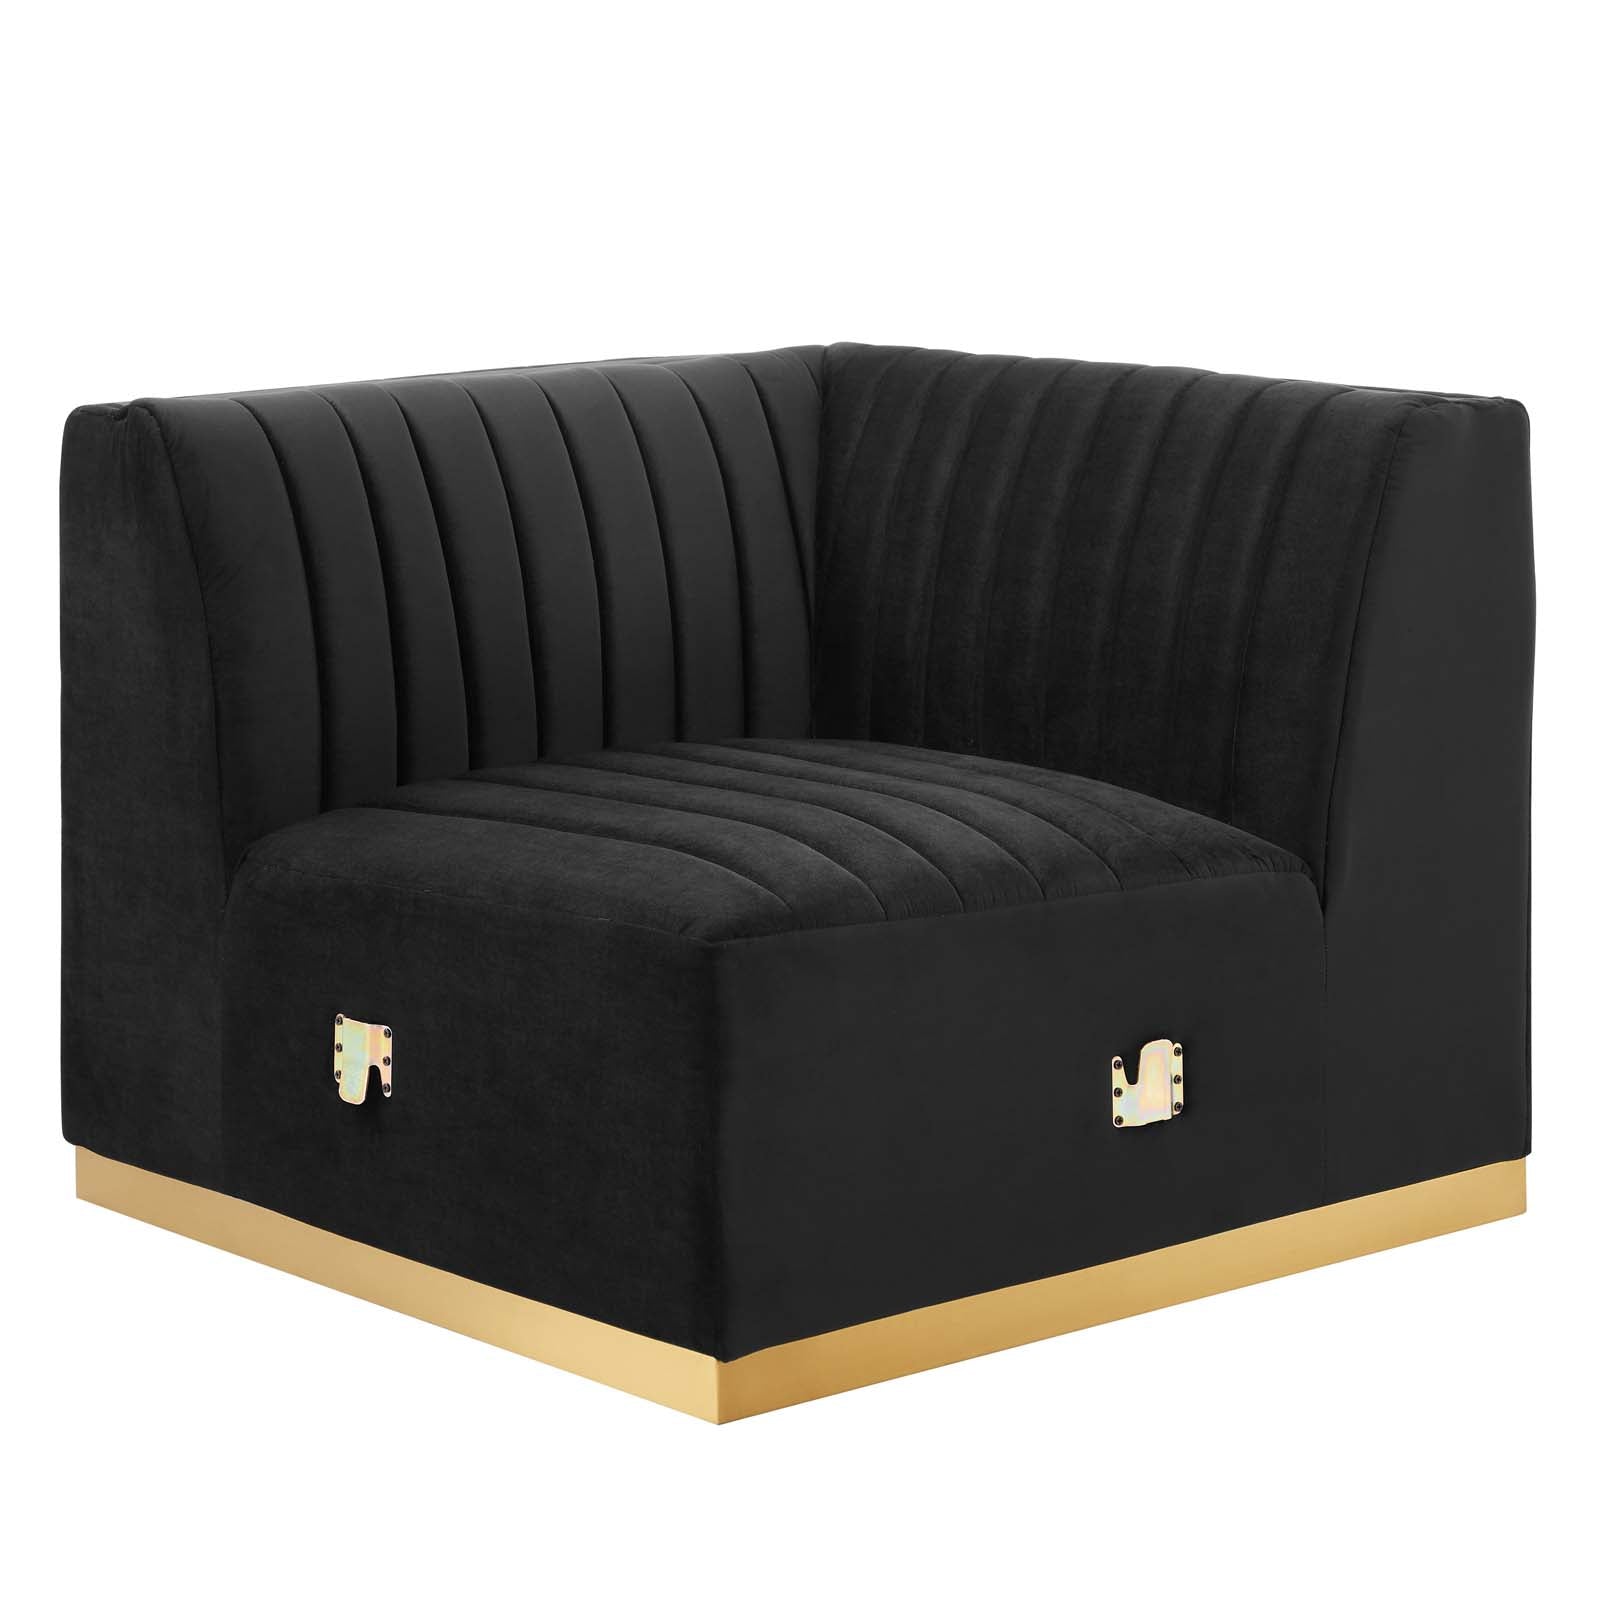 Modway Accent Chairs - Conjure Channel Tufted Performance Velvet Right Corner Chair Gold Black